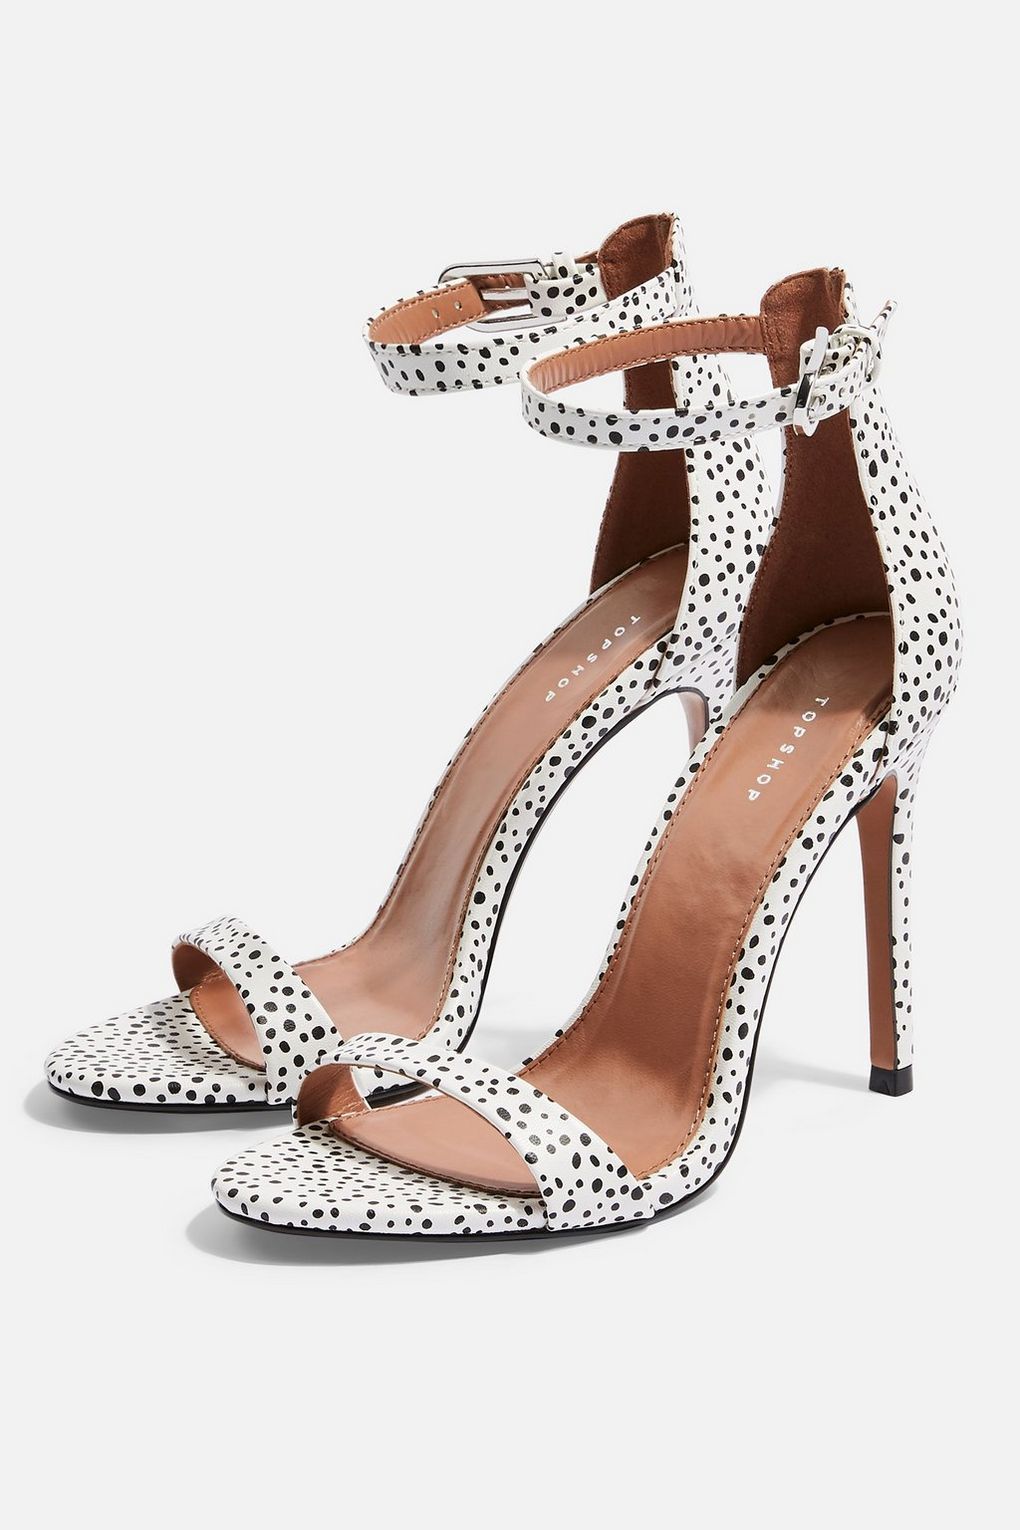 19 Cute Homecoming Shoes and Heels for 